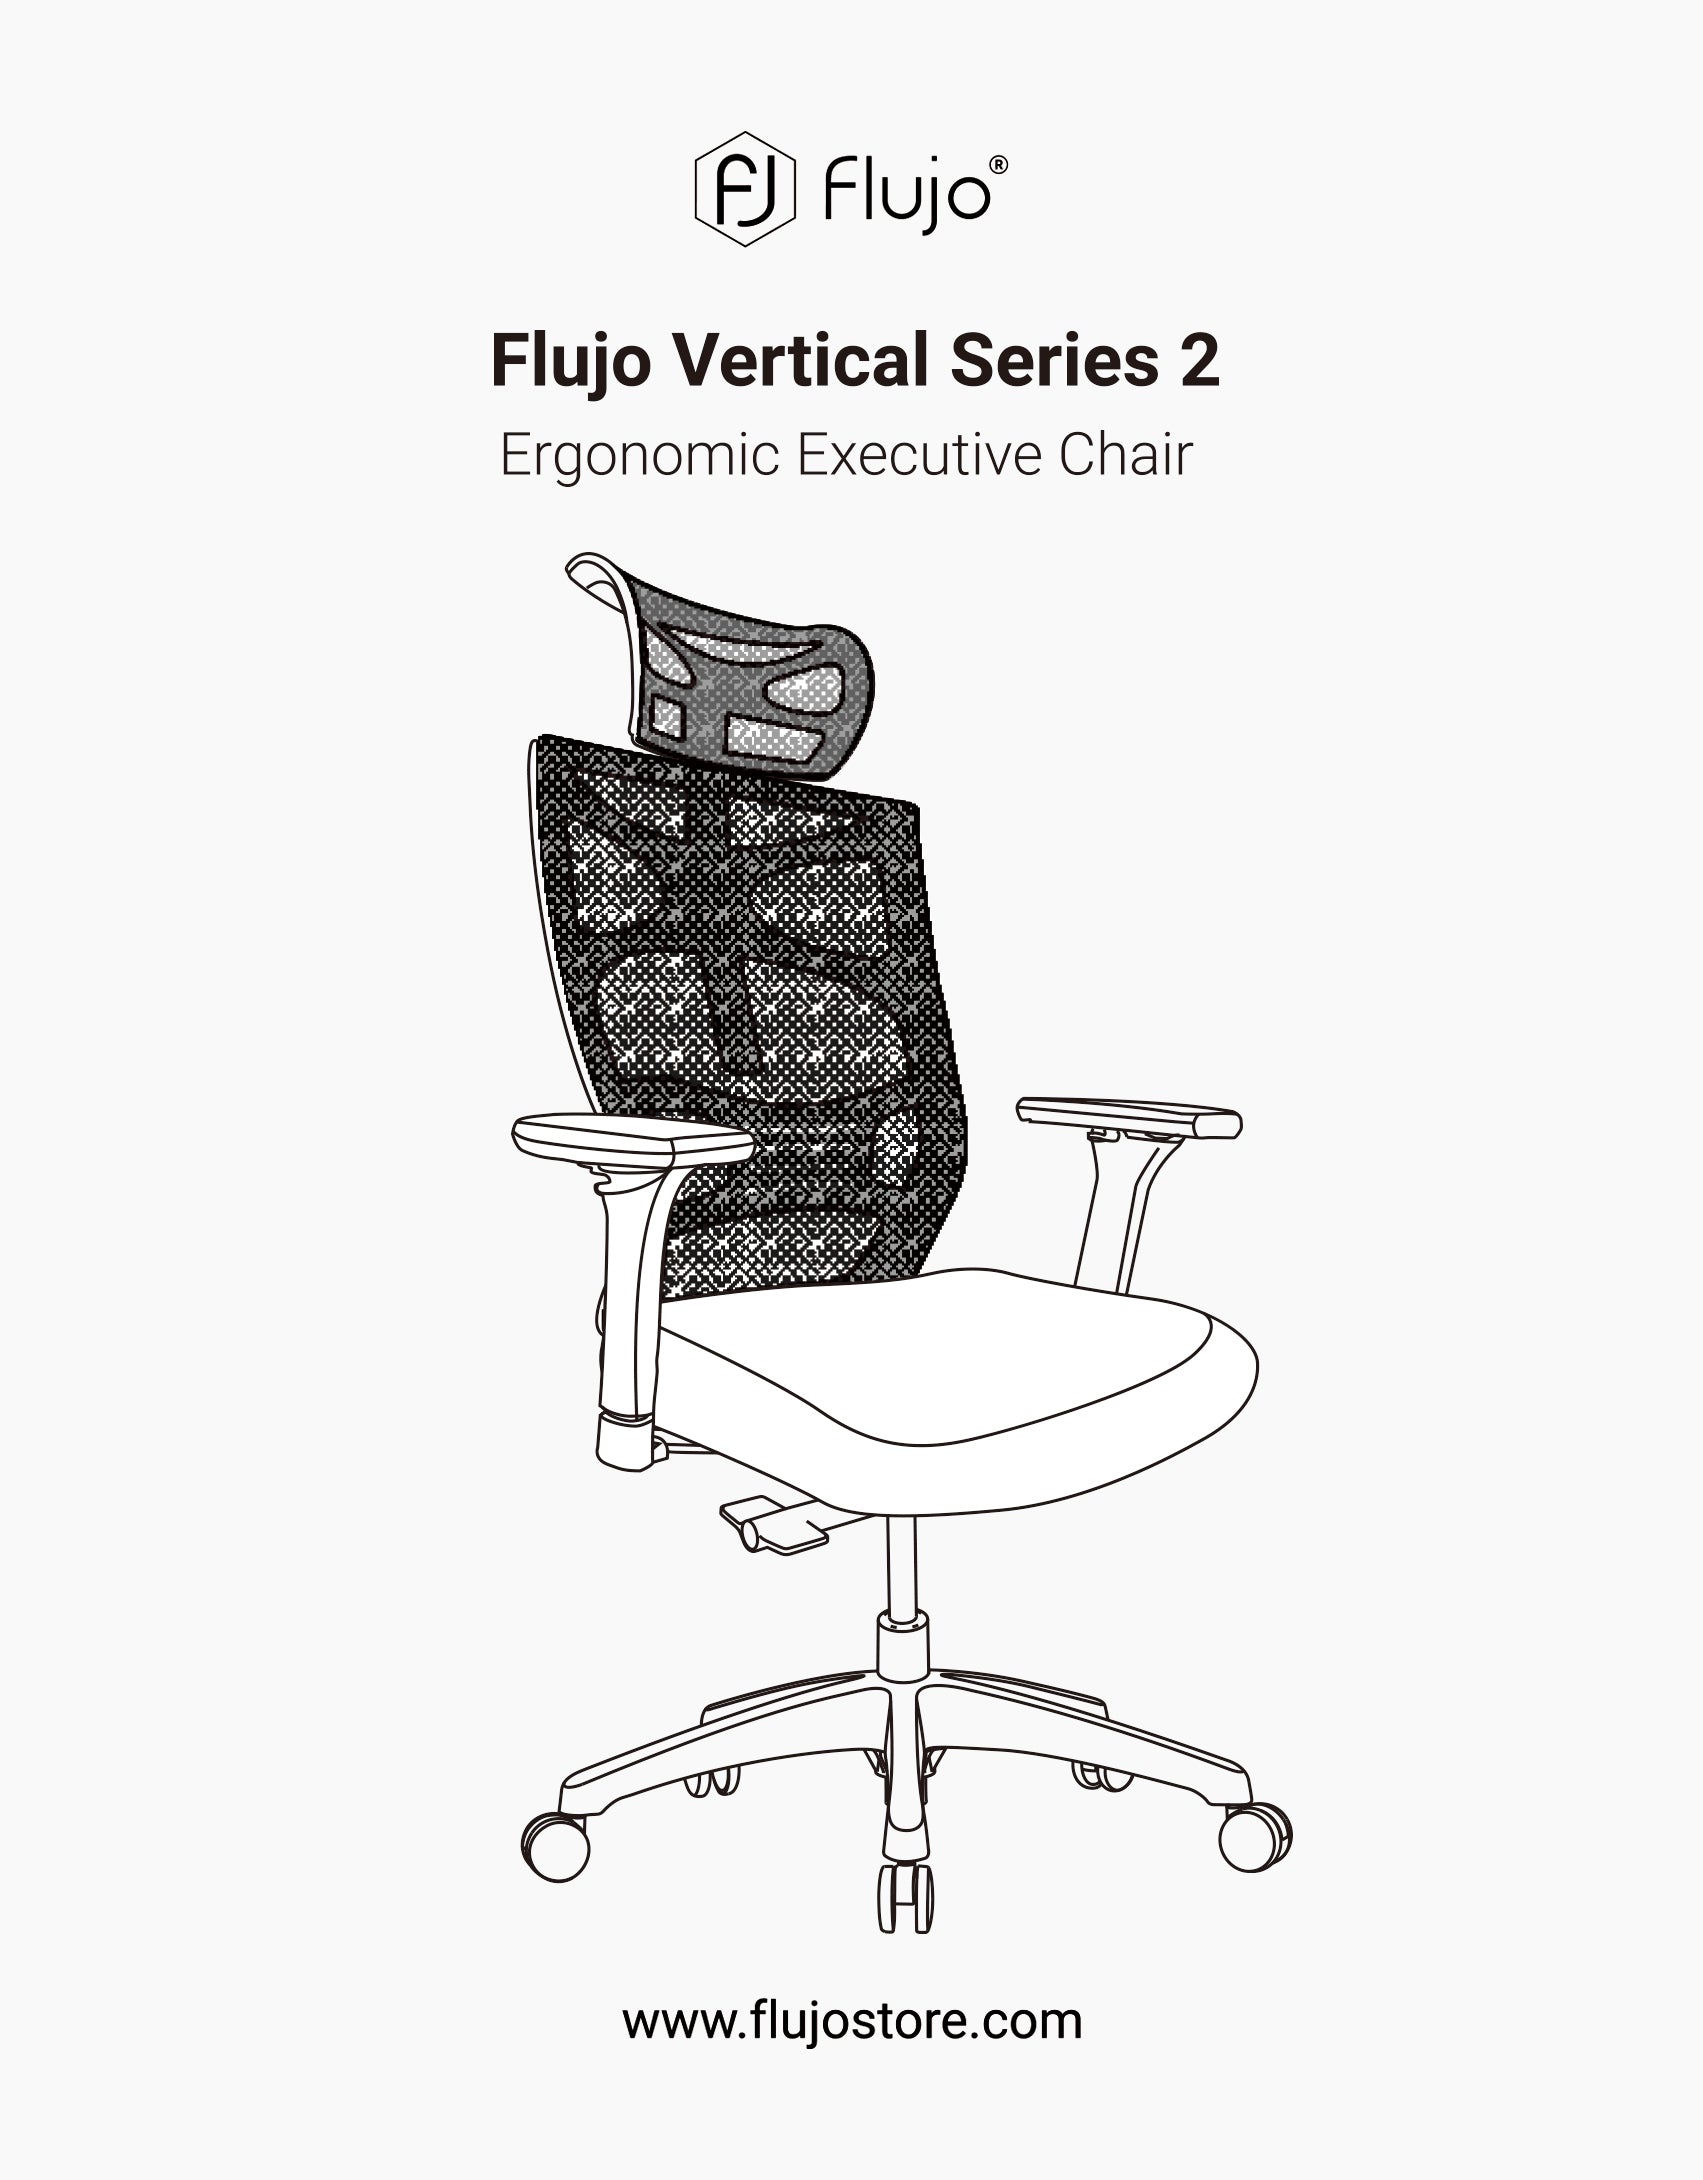 Graphic of the Flujo Vertical Series 2 Ergonomic Executive Chair, with a high mesh back and distinct headrest, available for purchase at Flujo's online store.